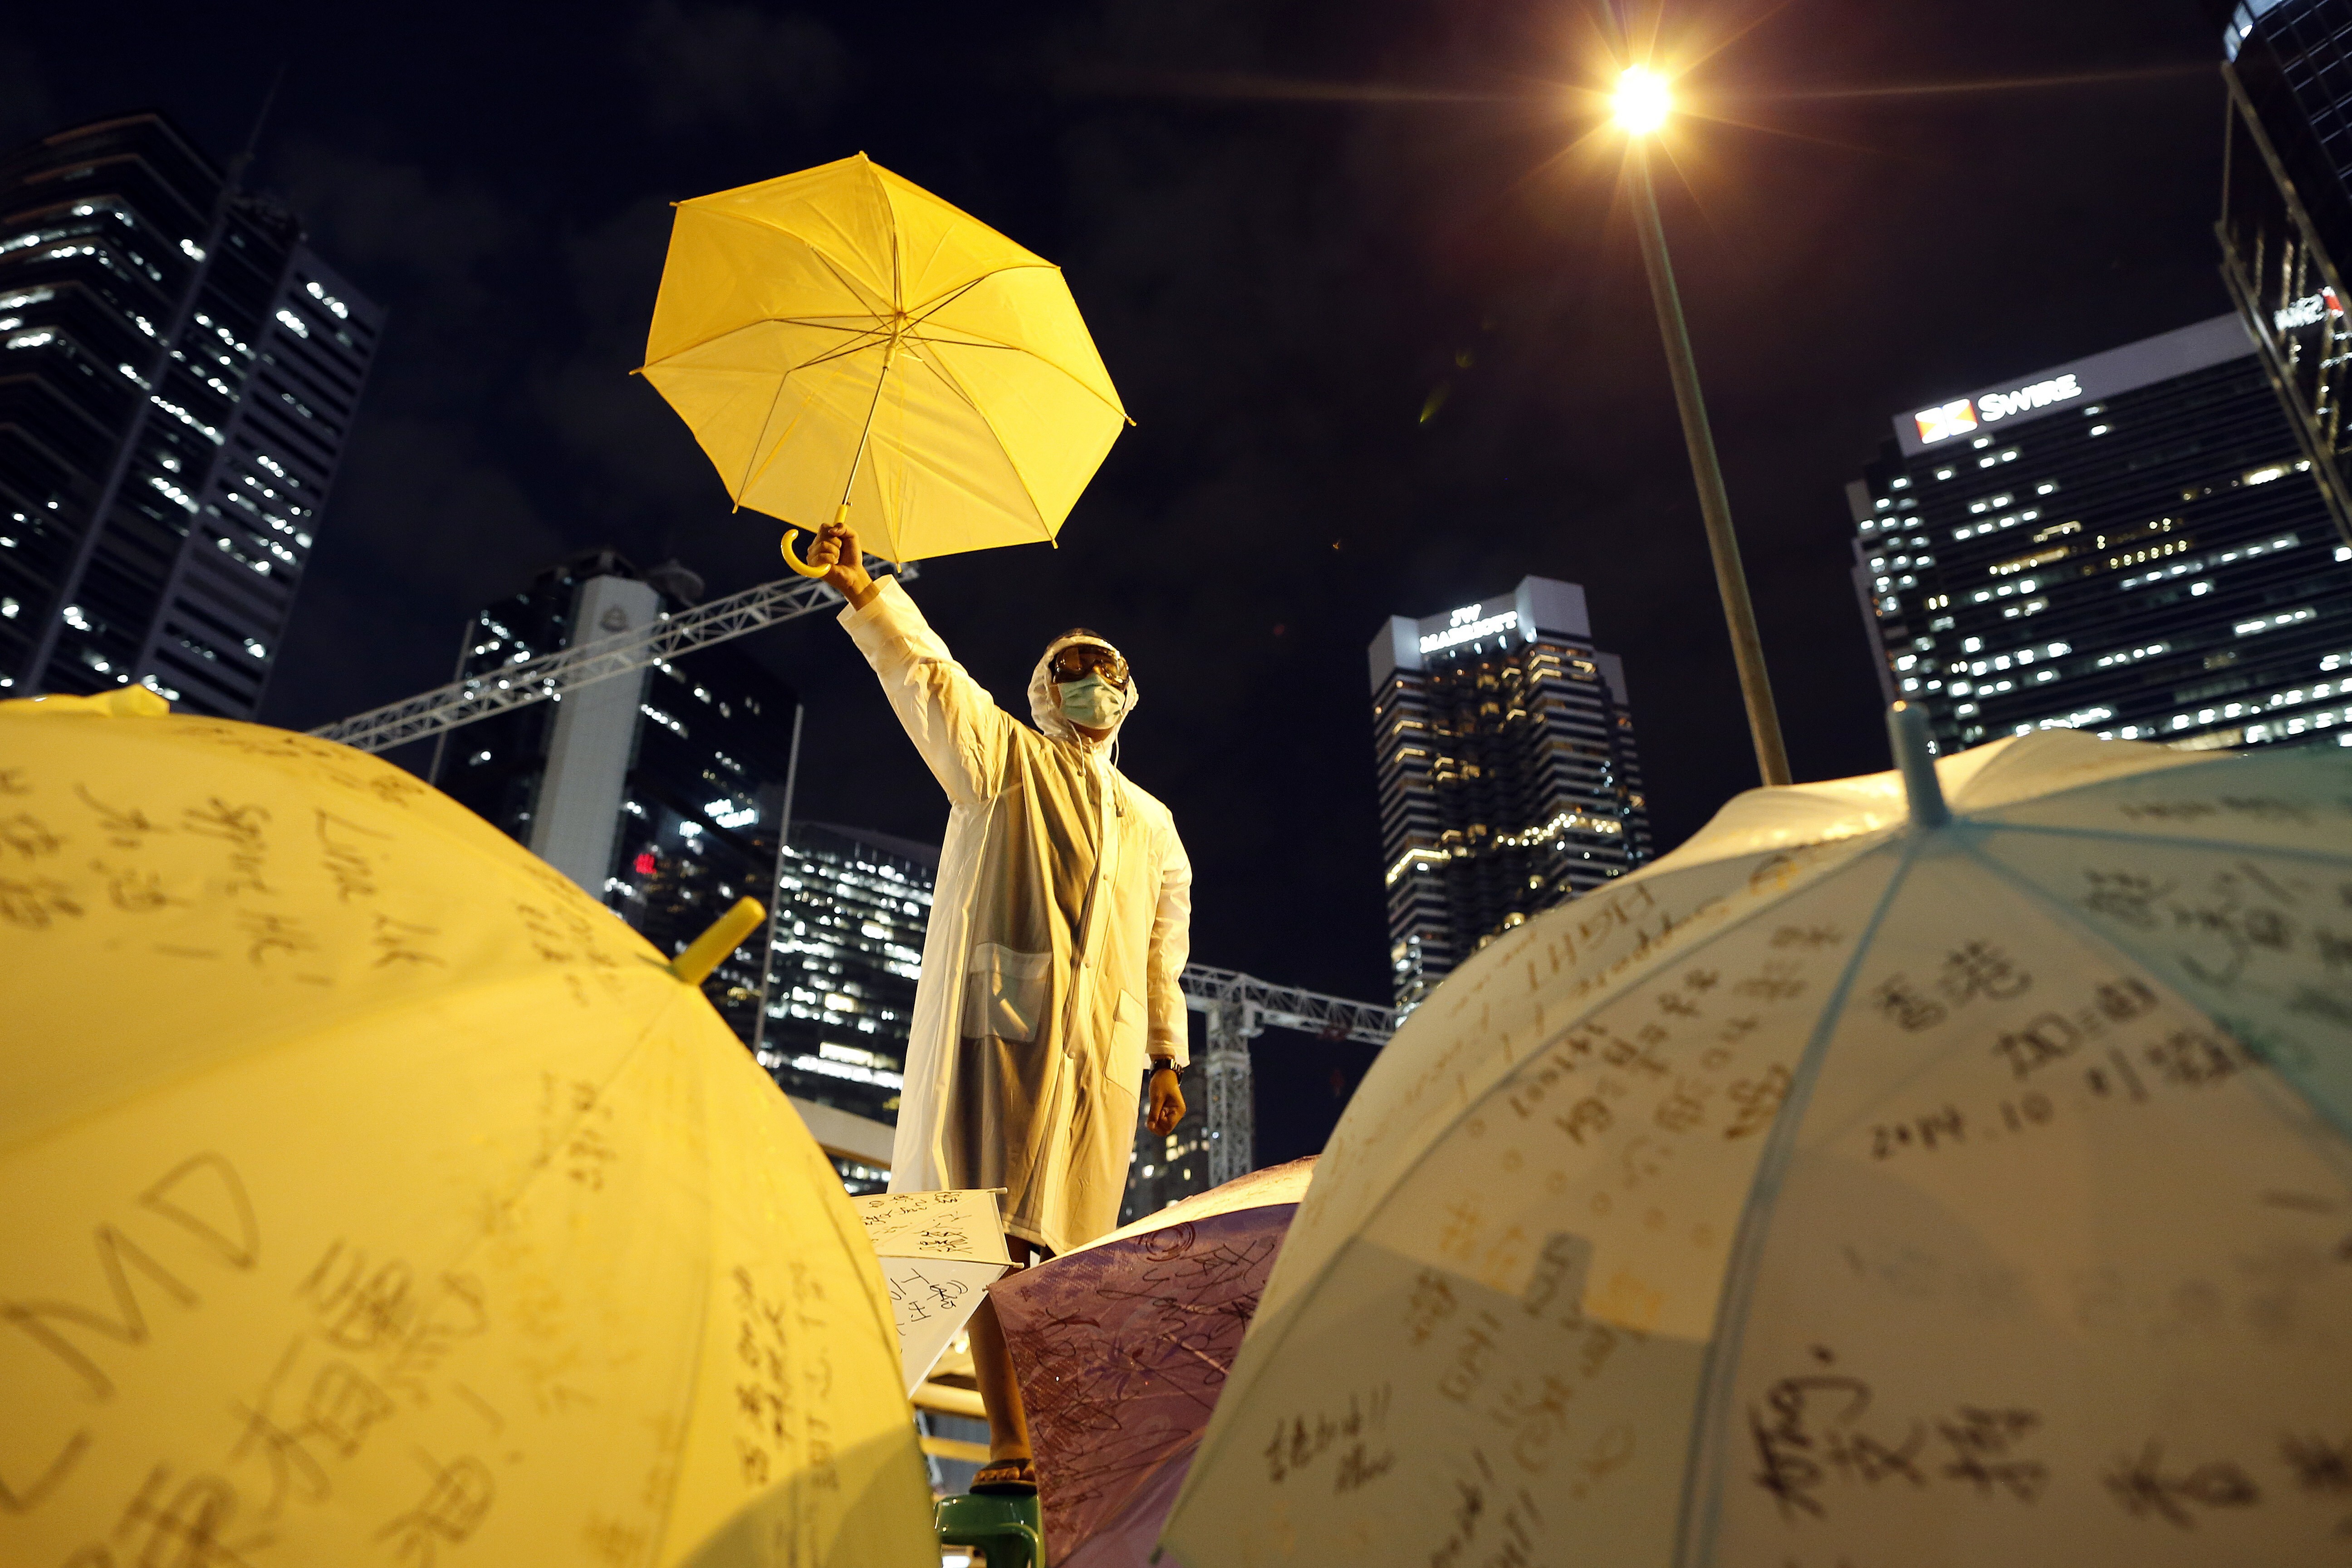 Yellow has become the colour of the anti-government protest movement in Hong Kong.